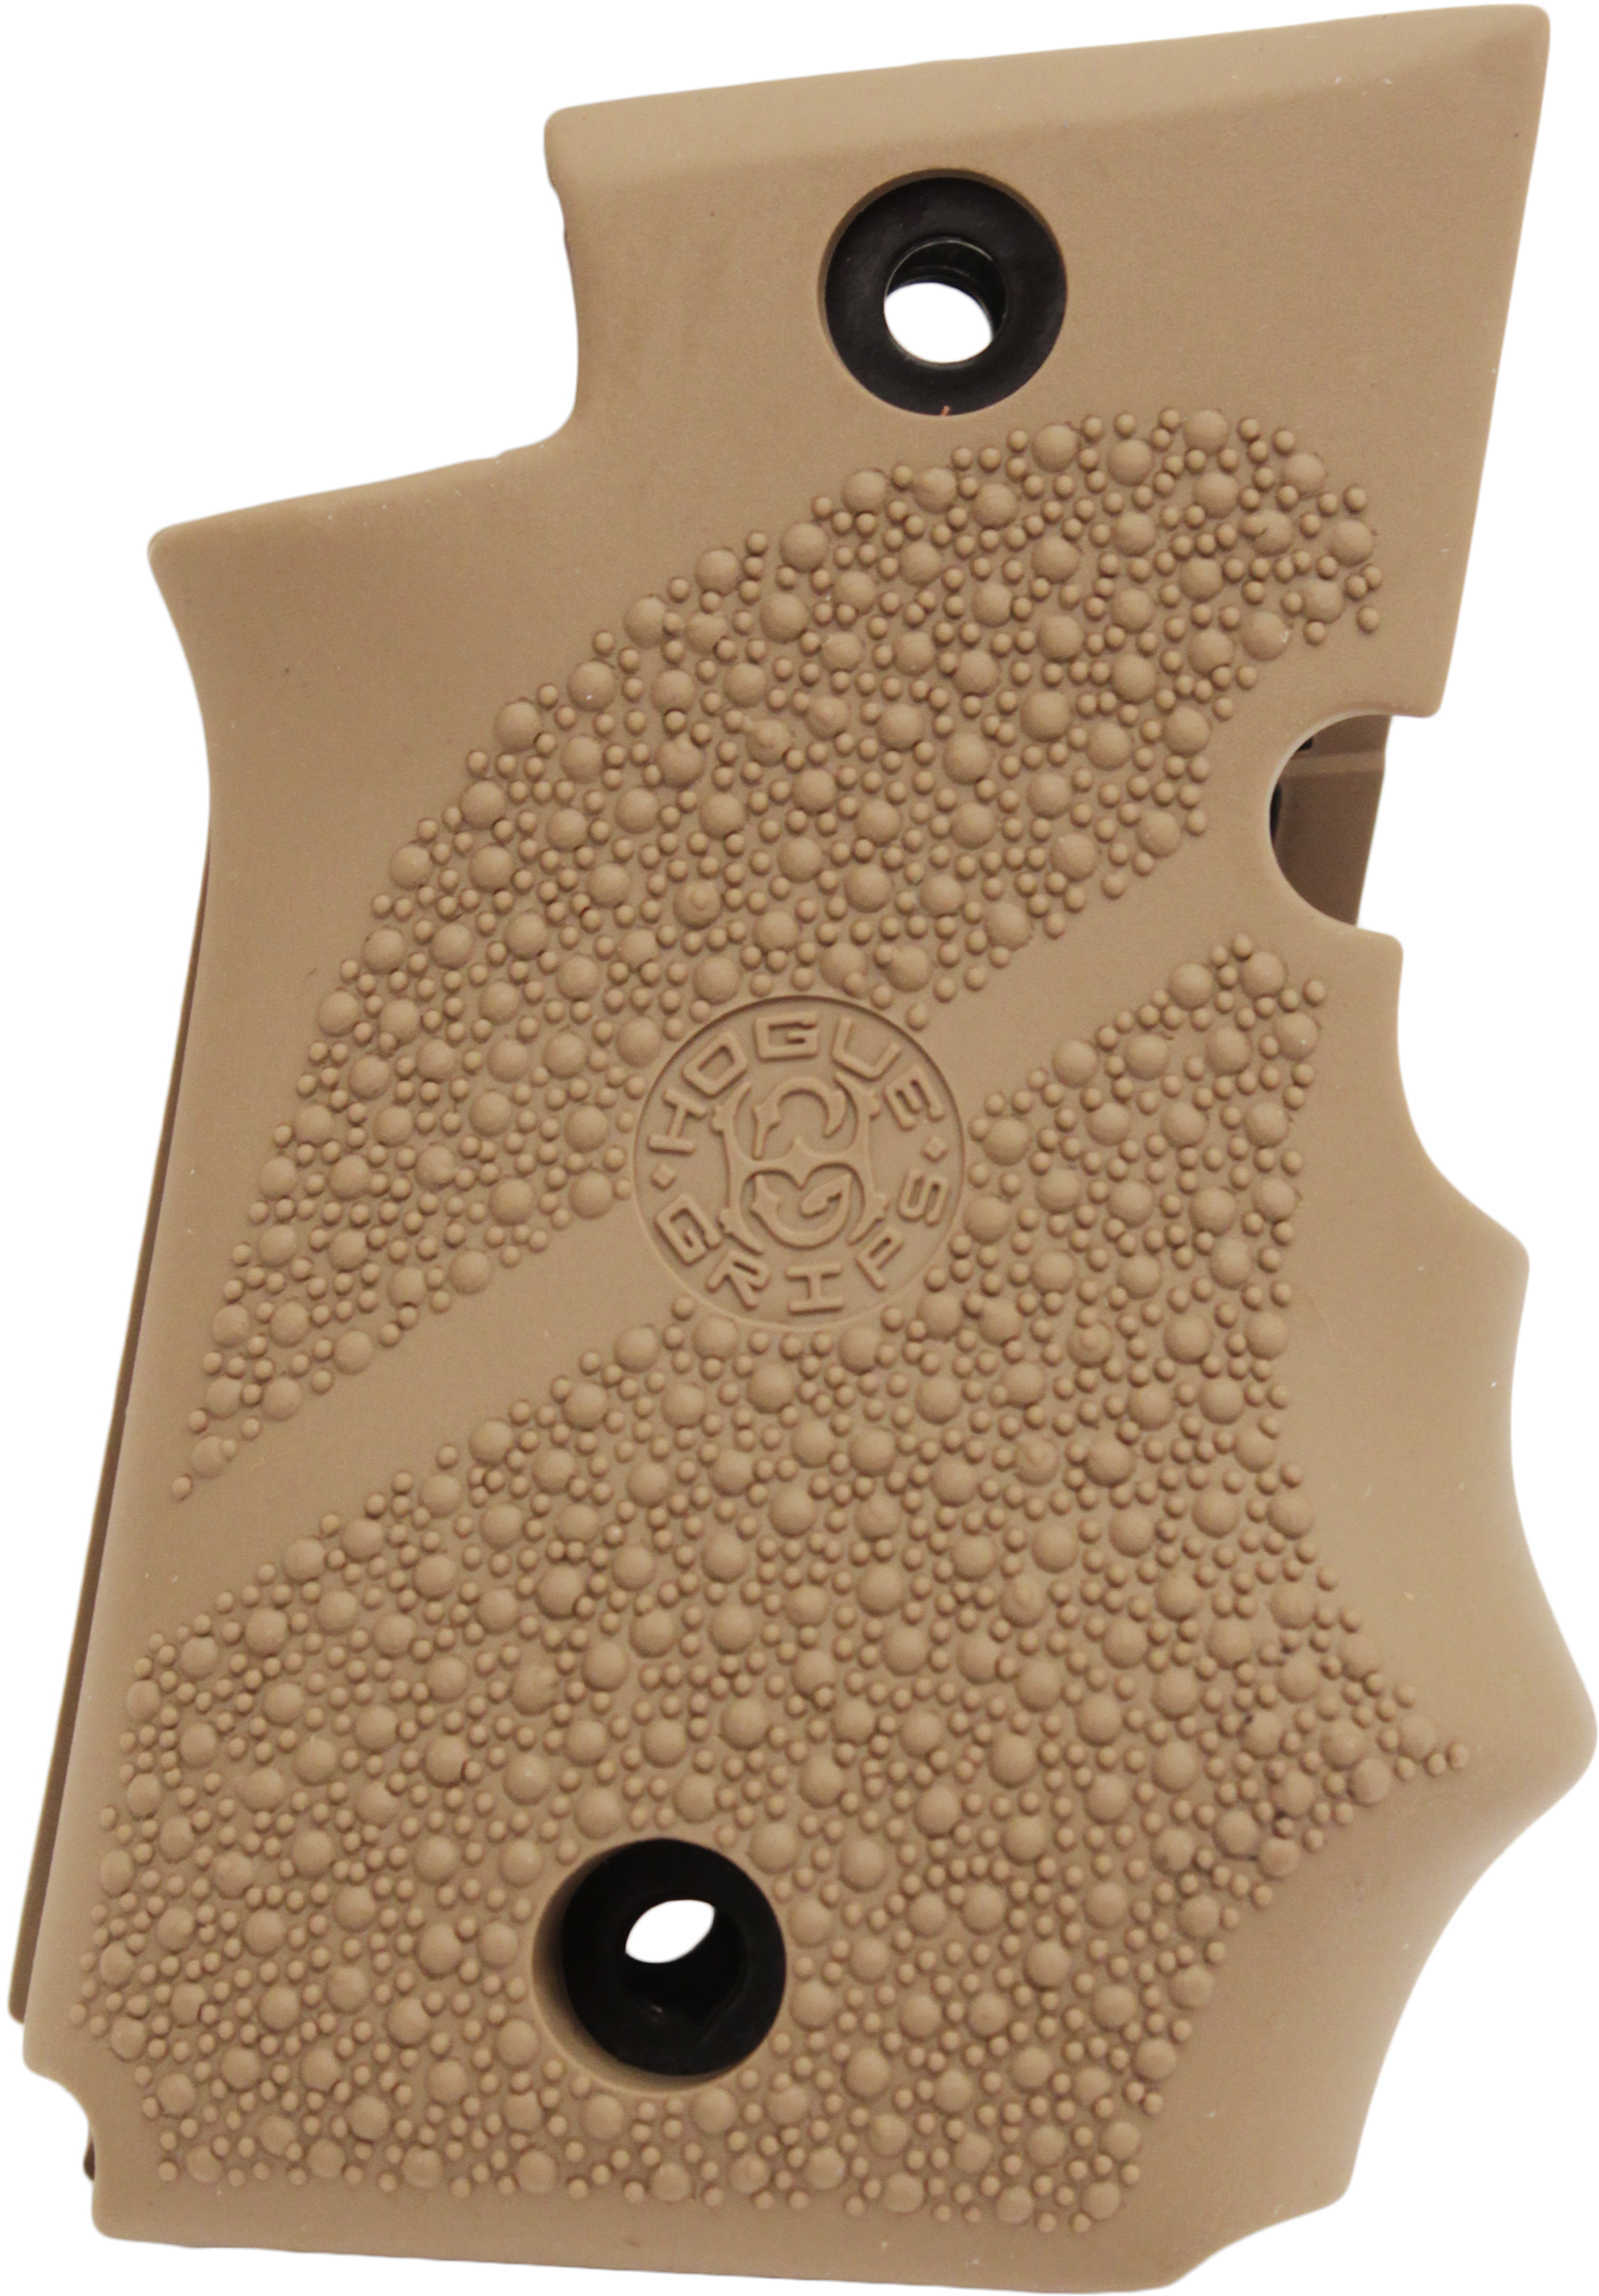 Hogue Grips SIGARMS P938 W/AMBI Safety FDE